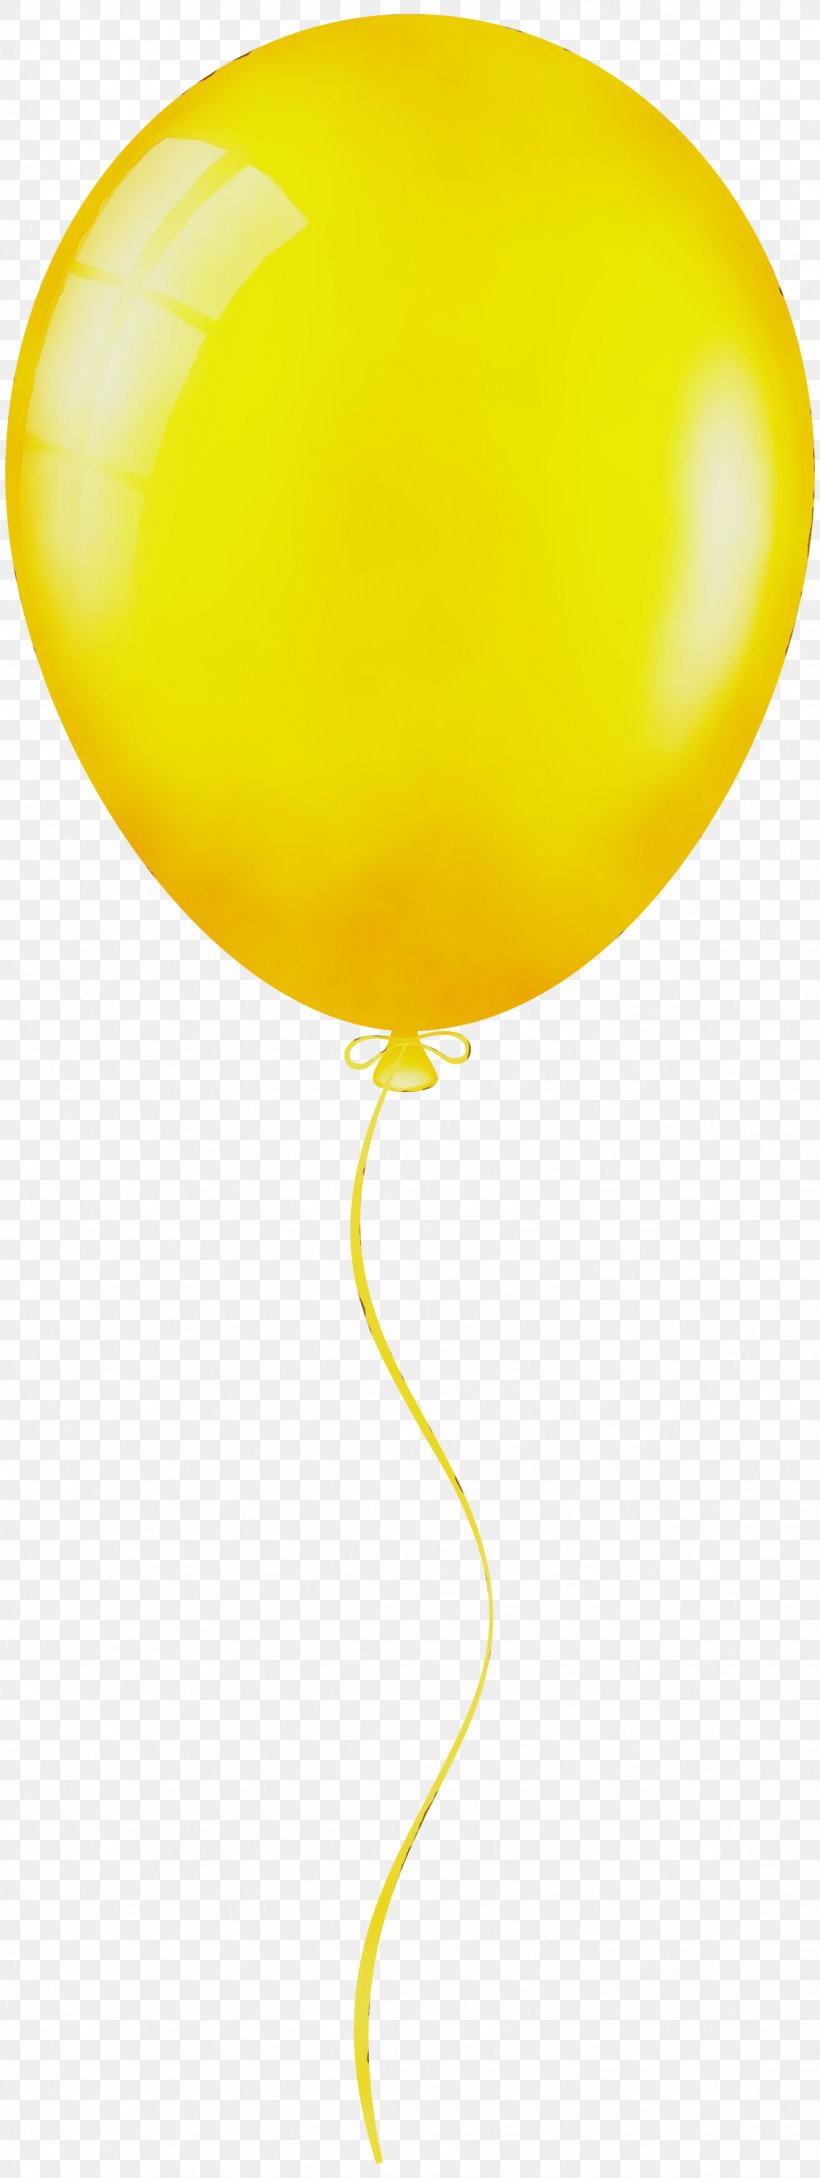 Yellow Balloons Cluster Ballooning Birthday, PNG, 1129x3000px, Watercolor, Balloon, Birthday, Cluster Ballooning, Paint Download Free